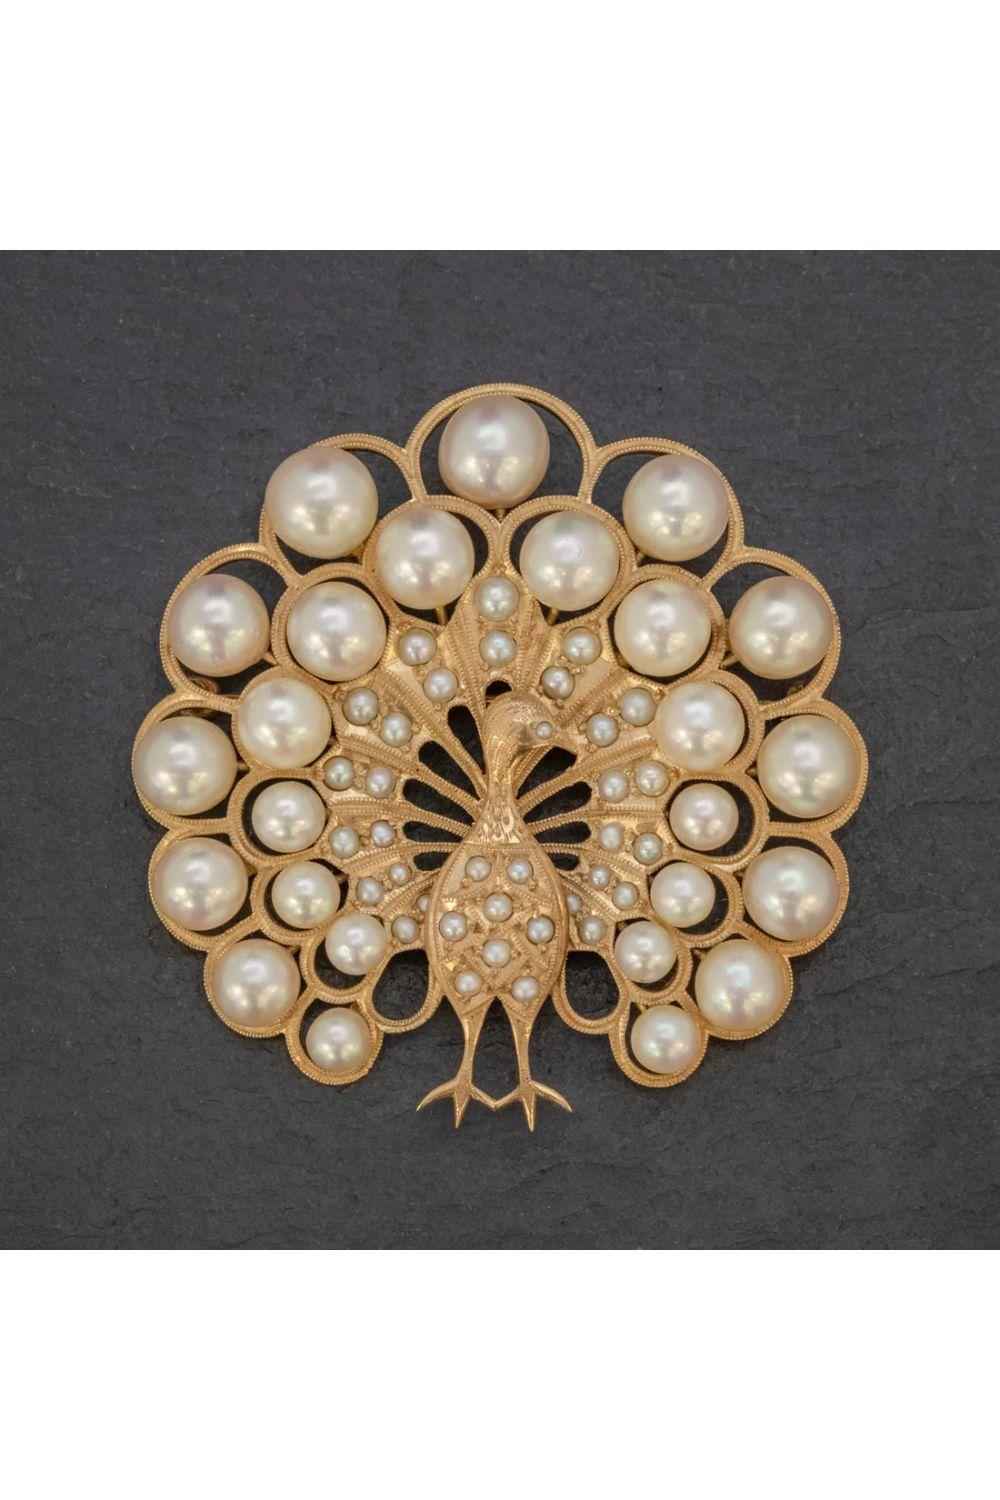 A majestic vintage peacock brooch decorated with an array of lustrous cultured pearls of various sizes that graduate out from the body and across the peacock’s large and extravagant tail feathers.

The piece is a wonderful open-worked design, with